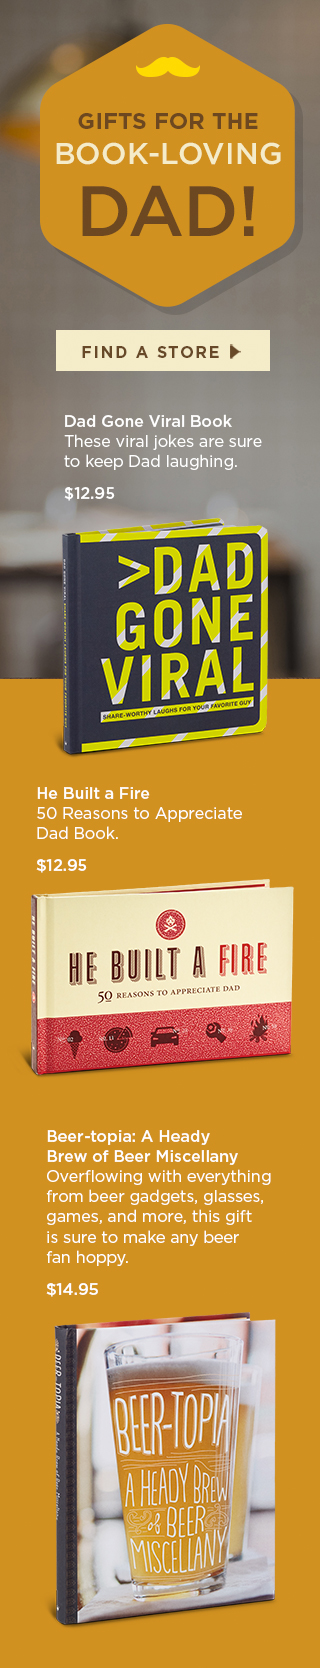 Gifts for the book-loving Dad!